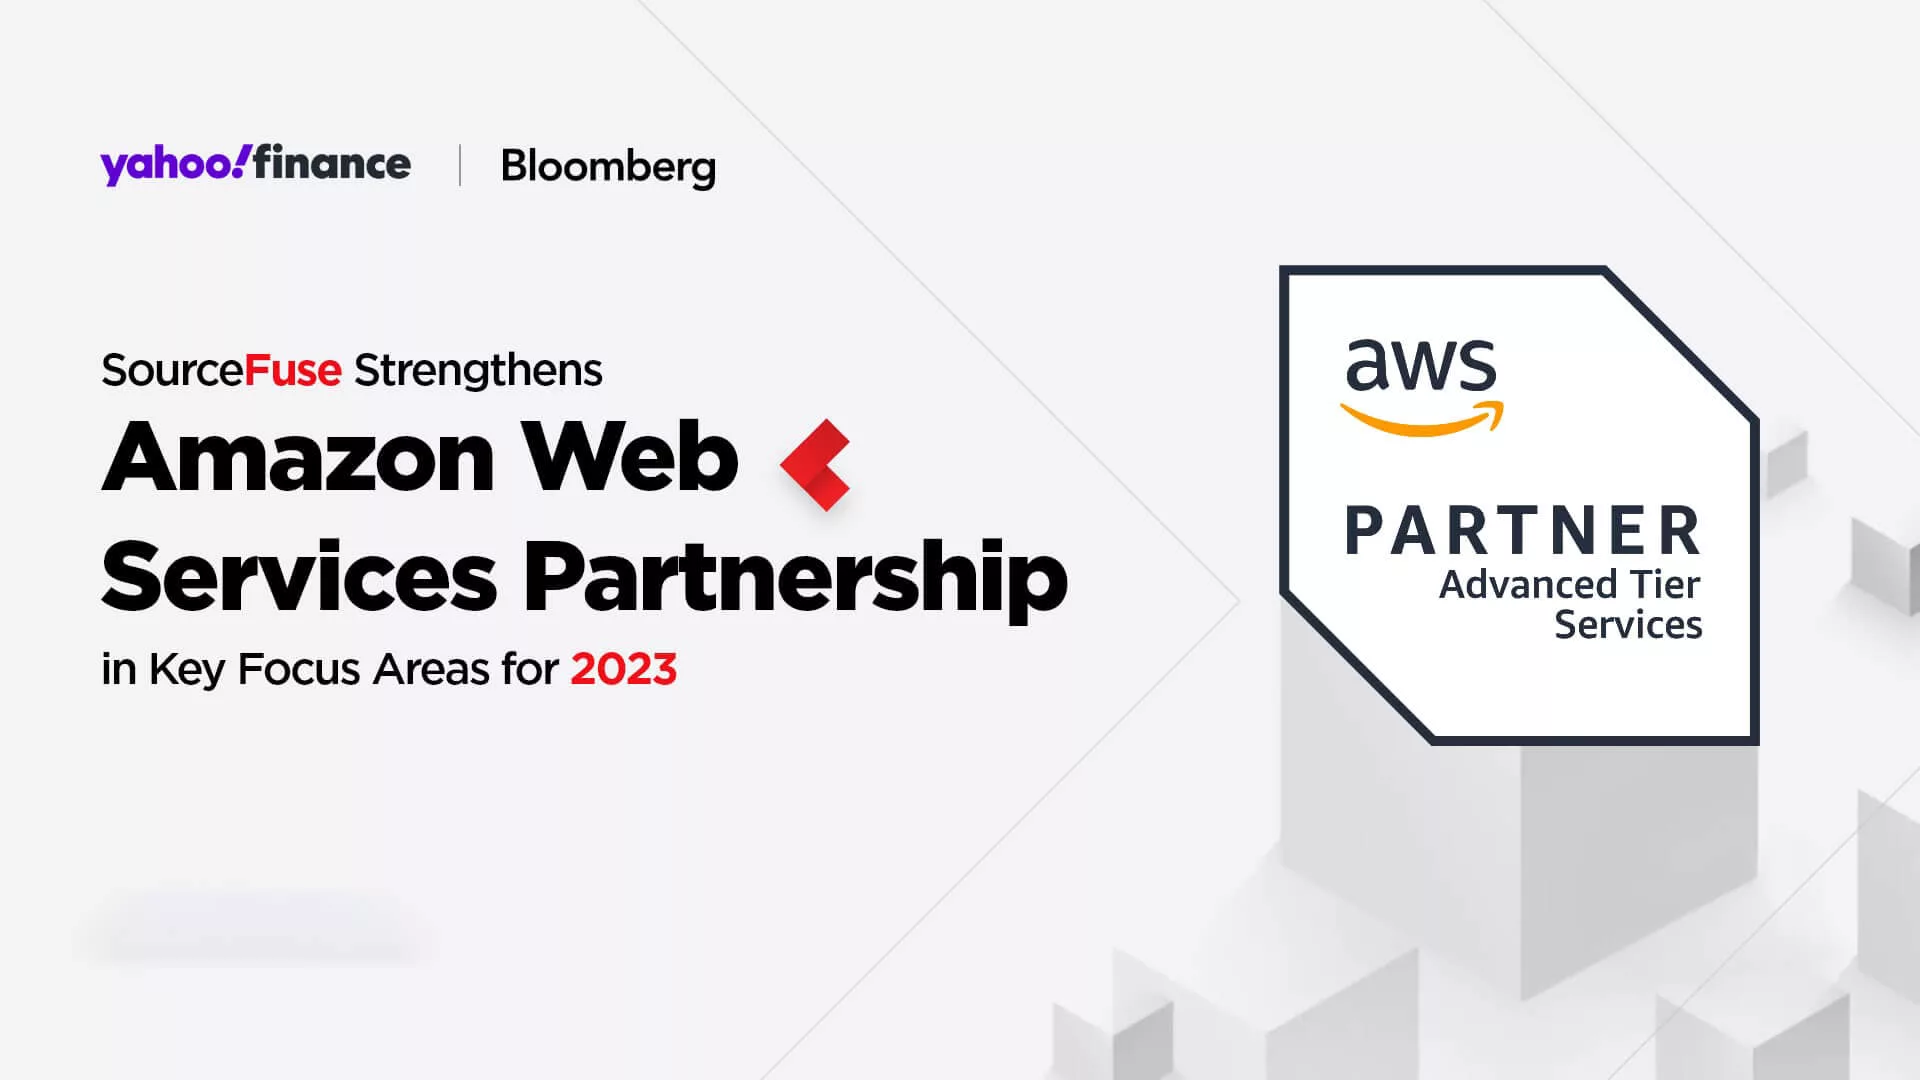 SourceFuse Strengthens Amazon Web Services Partnership in Key Focus Areas for 2023